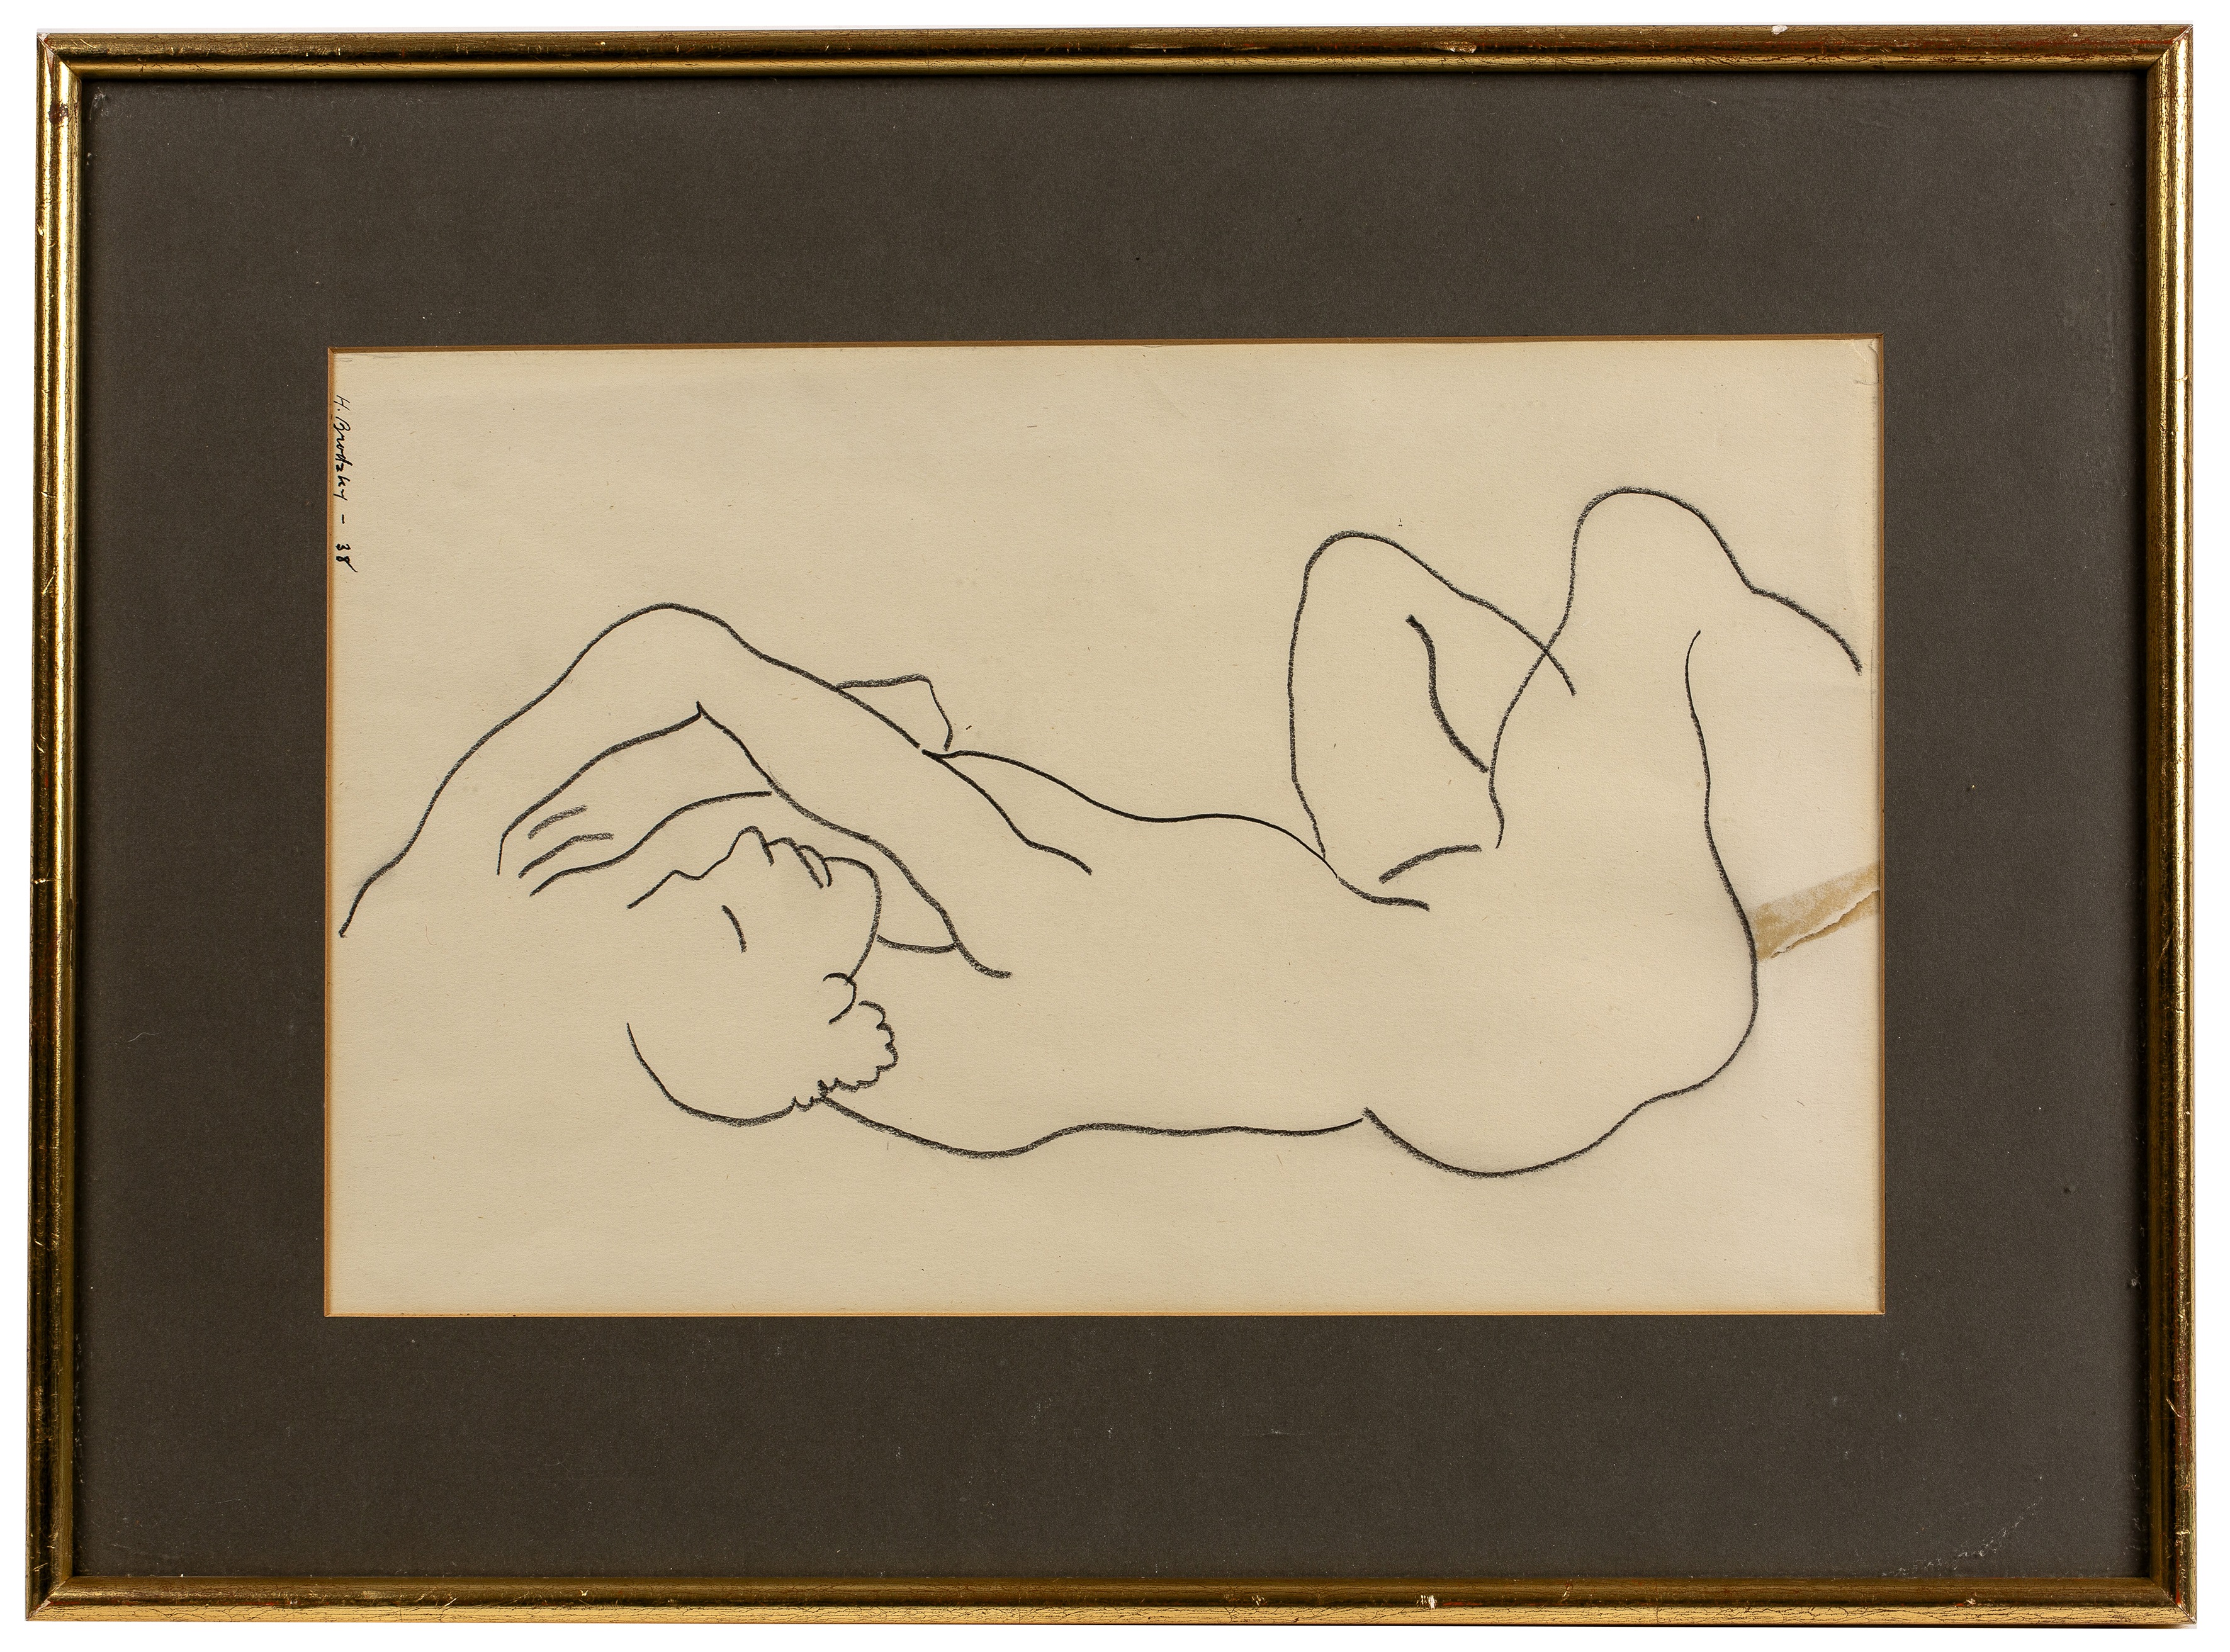 Horace Brodzky (1885-1969) Reclining Nude, 1938 signed and dated (upper left) black chalk on paper - Image 2 of 3